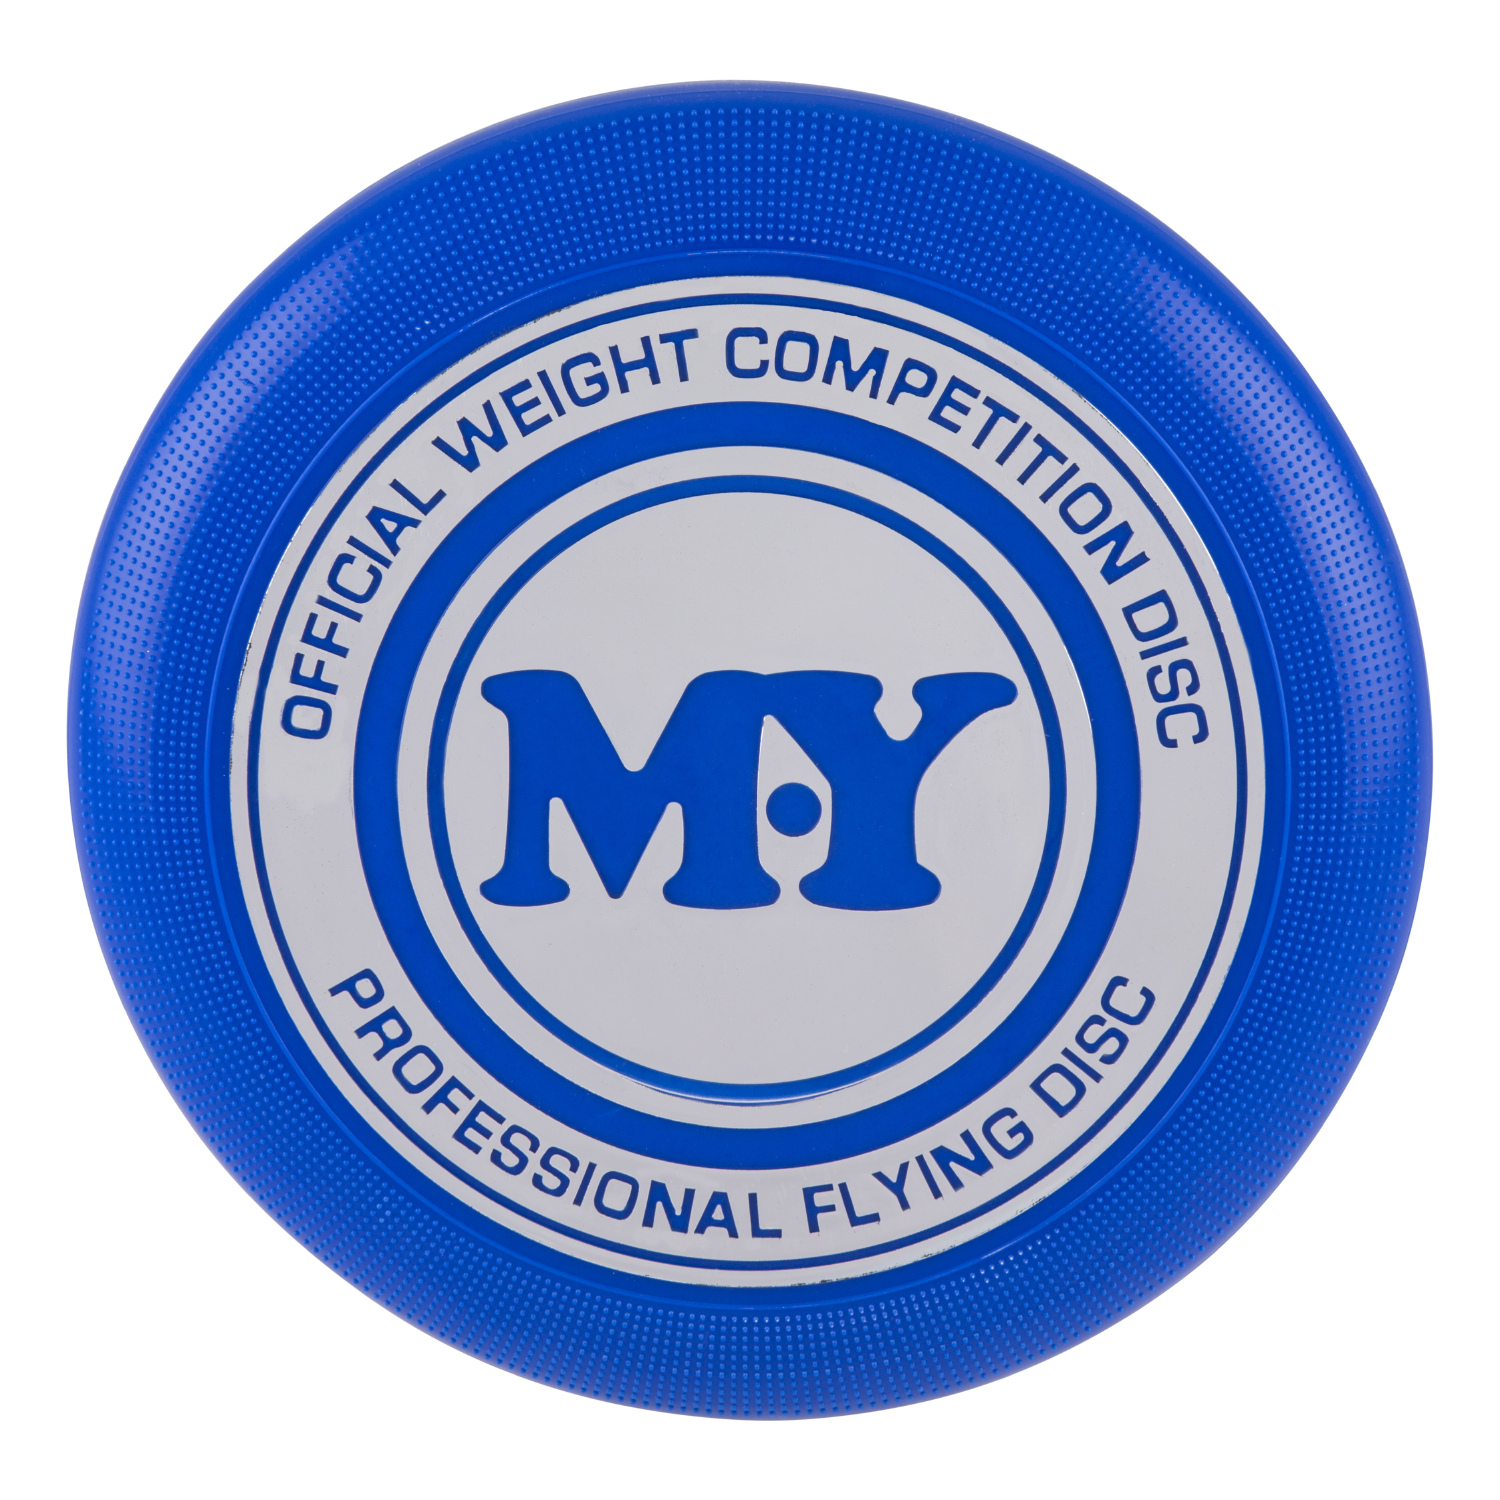 180g Professional Flying Disc Image 2